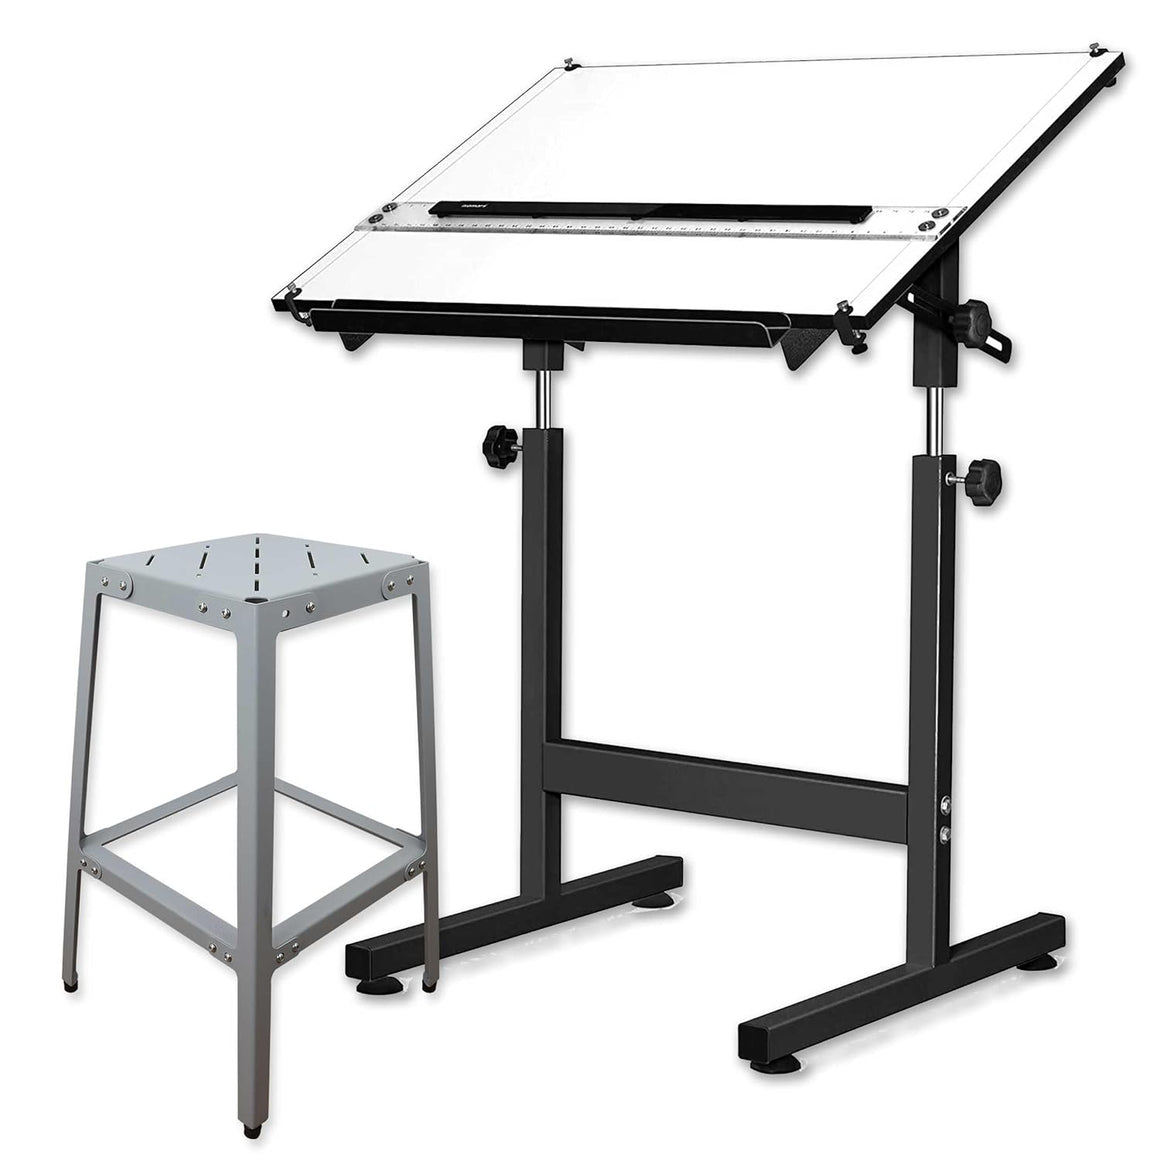 Isomars Drawing Drafting Board Table - Scholar with Parallel Ruler A1 White Laminated Board 25.5"x35" and Drafting Metal Stool Set | Complete Engineer, Draughtsman. Architects Drafting Set